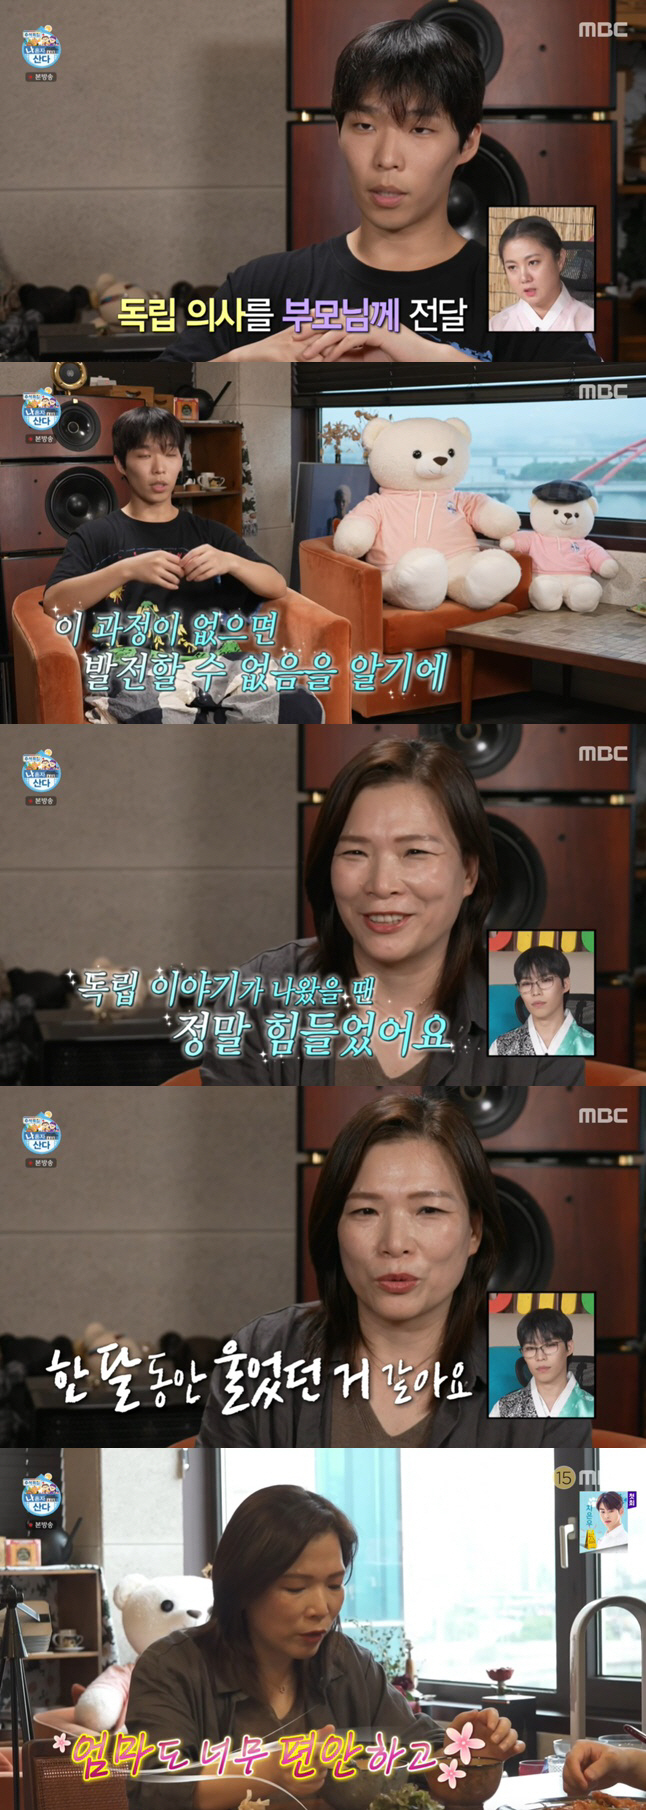 I Live Alone Lee Chan-hyuk Lee Soo-hyun Brother and Sisters mother confessed that she was shocked by her childrens declaration of Korean independence movement and cried for a month.In MBC I Live Alone broadcasted on the 29th, Lee Chan-hyuks affectionate son moments enjoying Mother and Date were revealed.On this day, Lee Chan-hyuk stepped out on Mother and Yeonnam-dong Date. Lee Chan-hyuk and Mother gazed at the same visuals.The two-shot of the hat, which is natural to touch, was surprising.Lee Chan-hyuk said that Mothers only hobby was dakku (decorating a diary) and visited the dakku shop together to make Mother more happy.Lee Chan-hyuk and Mother, who found goodies resembling Lee Soo-hyun, a pro-younger brother and a member of Akmu, said playfully, Look at me?Lee Chan-hyuk calculated all the duck items such as stickers and masking tapes that Mother picked up, and gave them a steamed impression with Hyodo Flex.Lee Chan-hyuk also became the main character of the caricature painting with his mother. The cute figure sitting side by side in front of the artist drawing a picture attracted attention.Lee Chan-hyuks mother said, I gave birth!Lee Chan-hyuk, who later invited Mother home, treated Mother to the first dish of her life; he said, The Wakame soup I give to Mother, the two uwant?I started cooking ambitiously by preparing a small Wakame soup and a stir-fried recipe.However, from the beginning of the cooking, I used Mother Chance, and I showed a common K-son, which is an excuse for sweating in the refrigerator.At the end of the twists and turns, a dish for the Mother was prepared. Wakame soup made with homemade perilla oil and stir-fried garlic was served only for Mother.Lee Chan-hyuk Mother tasted with emotion and expectation that it was the first food you gave me. However, Mother who ate Wakame soup laughed and Lee Chan-hyuk could not lift his head.Lee Chan-hyuk confessed, The Wakame soup was salty. It tasted like salt, but it was bland.On the other hand, Lee Chan-hyuk spent time in deep conversation with his mother. Lee Soo-hyun mentioned the same time when he declared Korean independence movement.Lee Chan-hyuk, who has always been with his family because he was homeschooled since middle school, recalled, It took courage to be separated (from his parents). It would be immature and difficult for us, but I told him because I didnt think we could develop without this process.In particular, Lee Chan-hyuks mother was shocked at the time, I cried for a month. Mother said, It was really hard at first when you were in your Korean independence movement.It was a Korean independence movement that I did not really think about. I cried for a month.I had a strong idea that I did not want to be separated from my children. Lee Chan-hyuk also recalled, Mother had difficulty breathing at the time. However, as the third year of Korean independence movement of children, Mother said, Now it seems to be good to make Korean independence movement.Mother is also comfortable and good, he showed satisfaction.